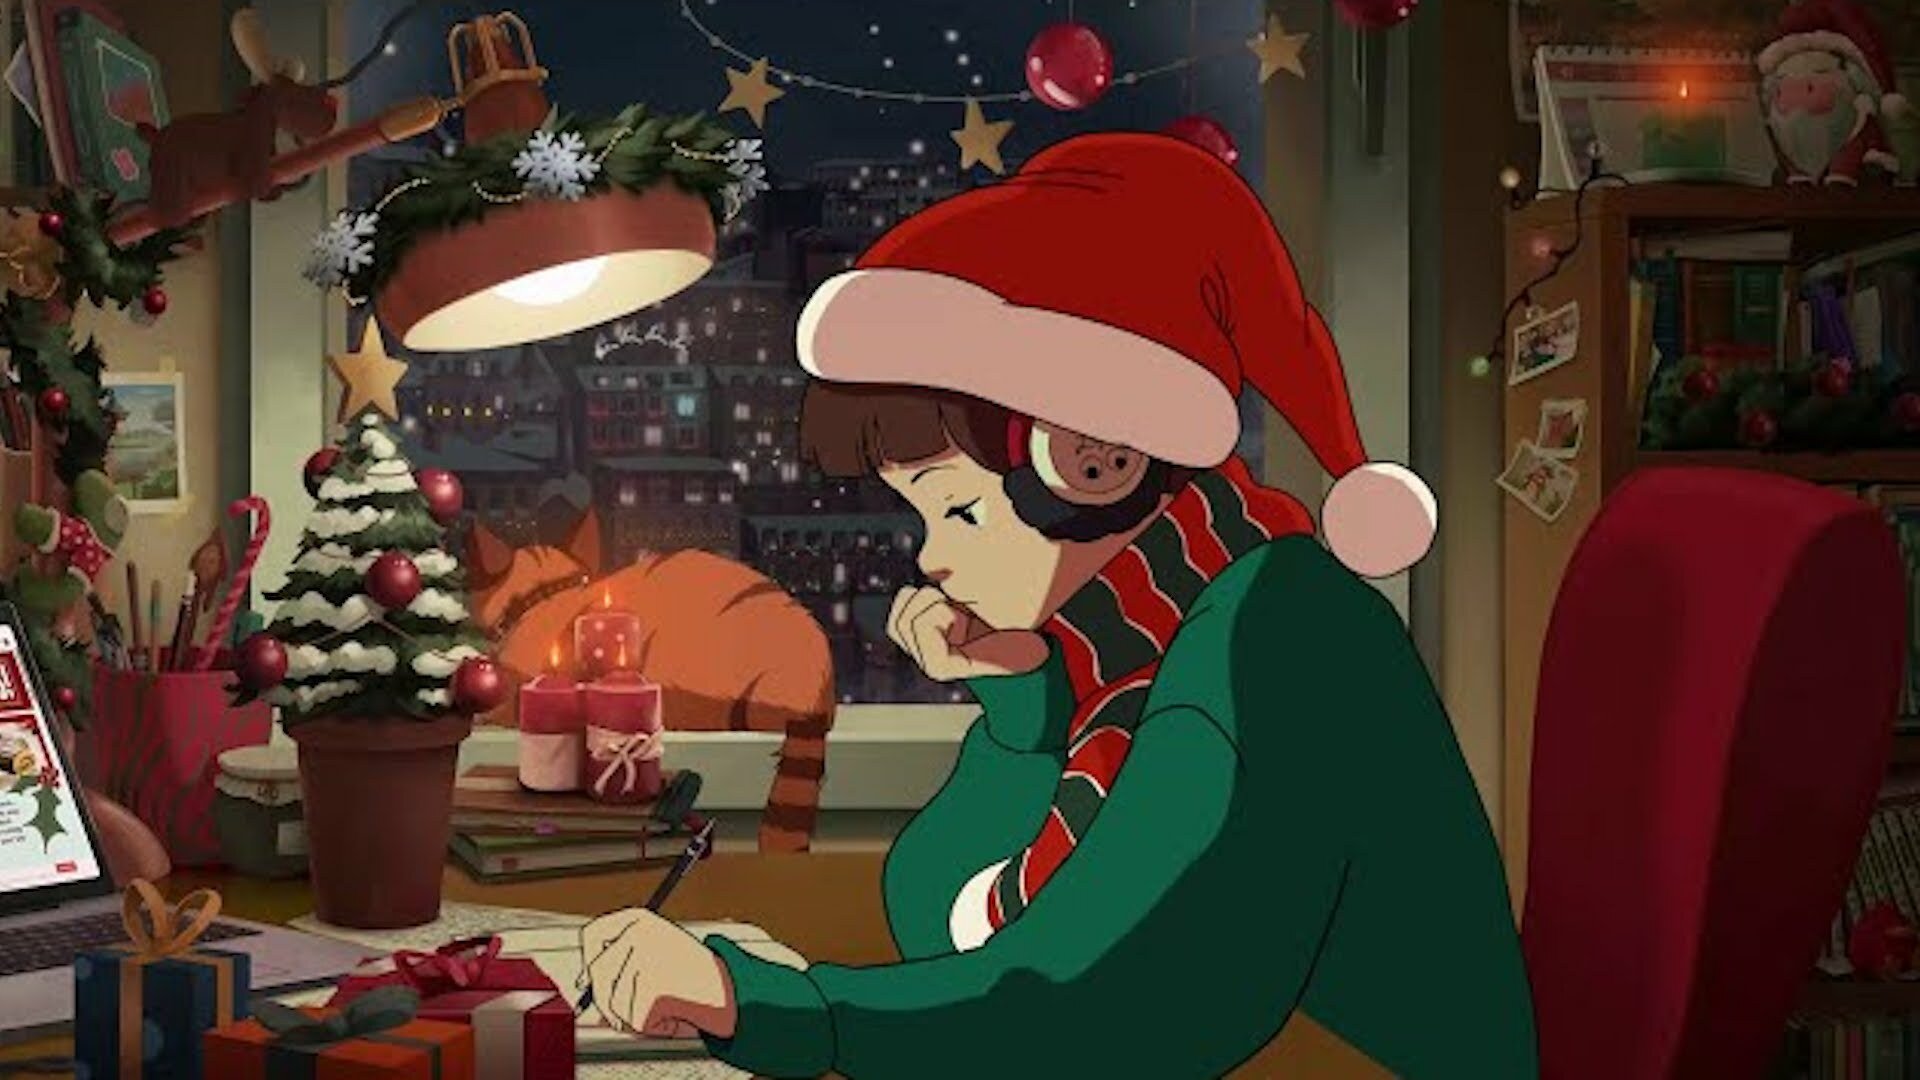 An animation of a girl studying with Christmas decorations around her.